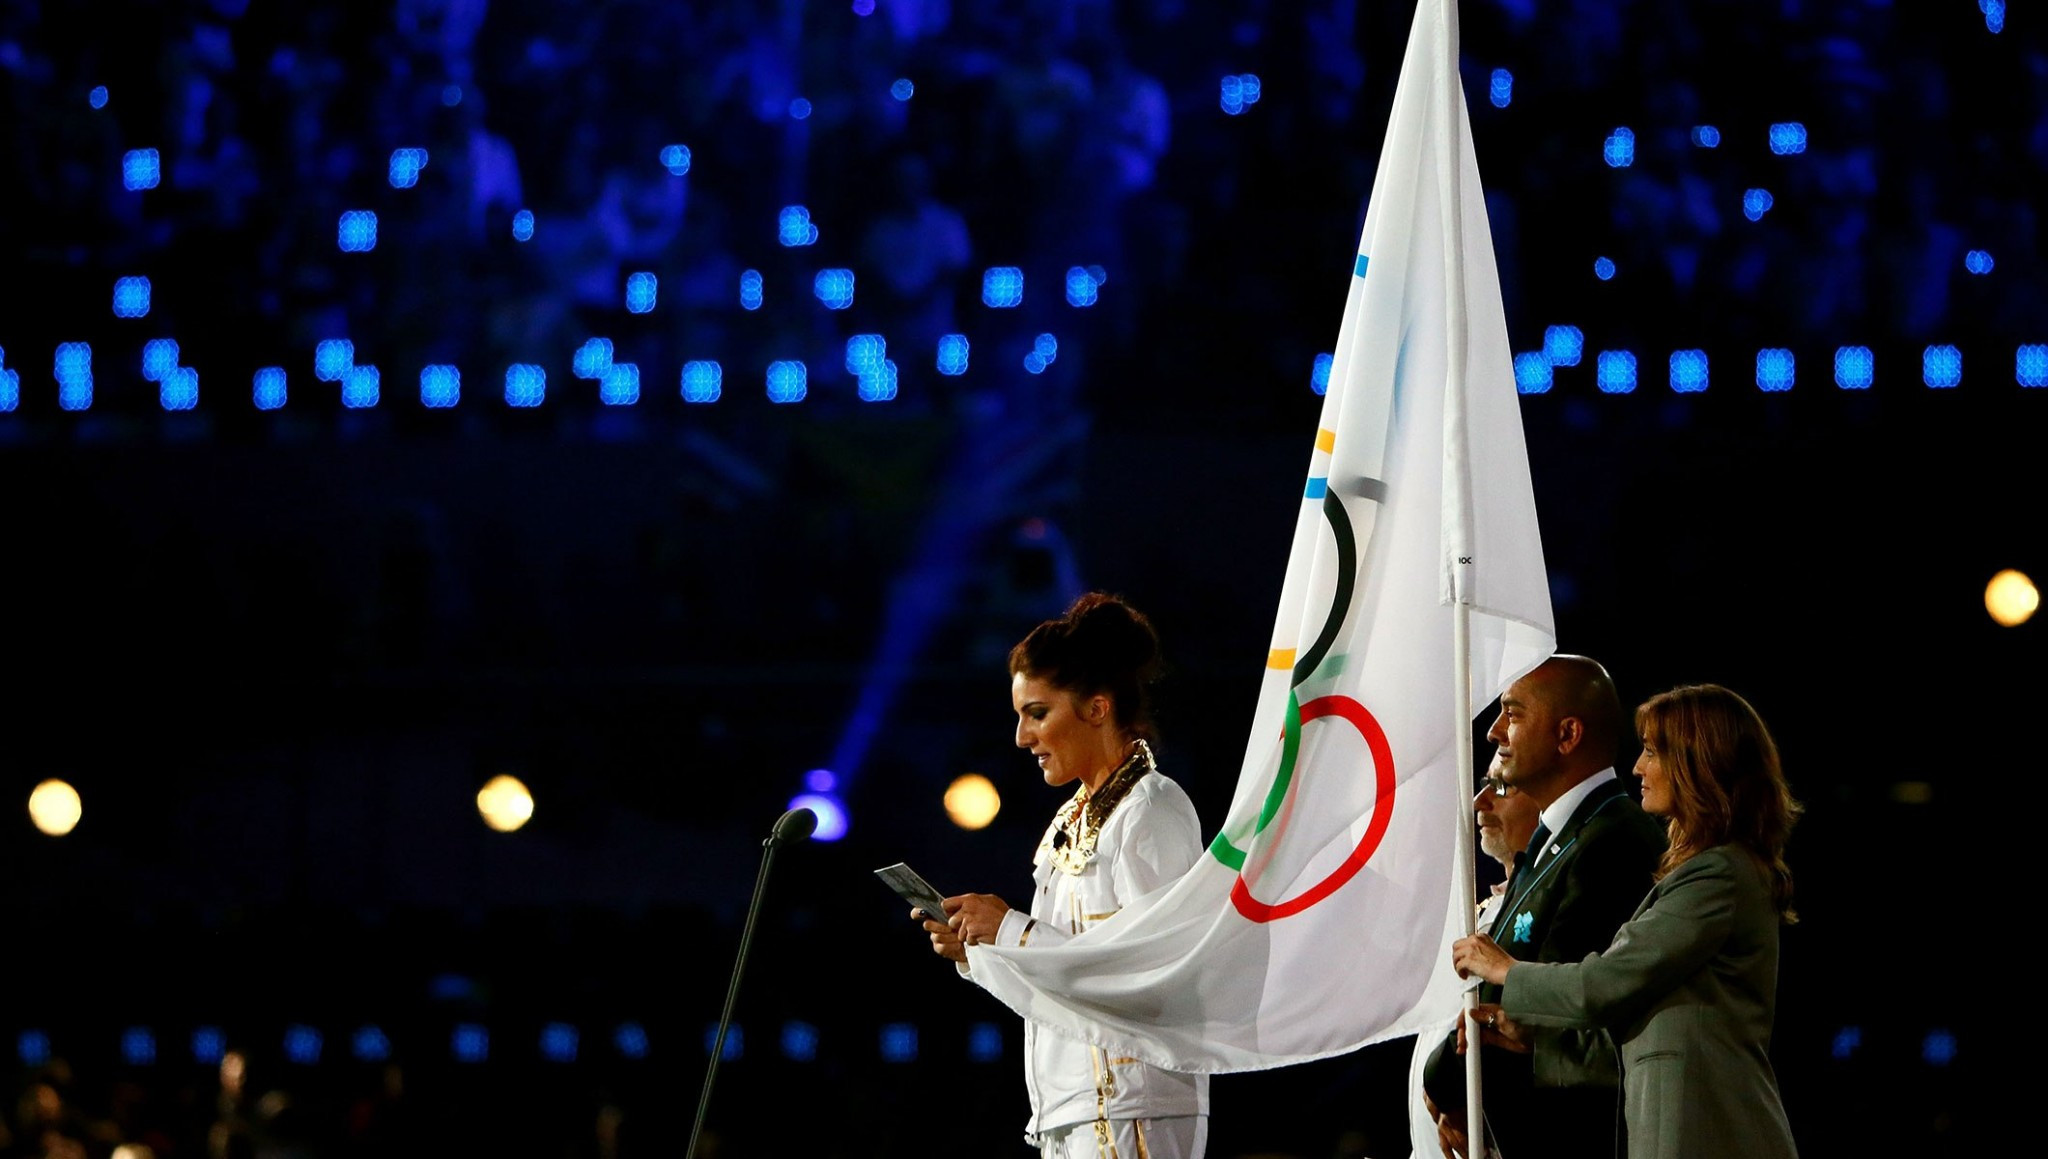 Athlete to take lead reading Olympic Oath at Pyeongchang 2018 Opening Ceremony